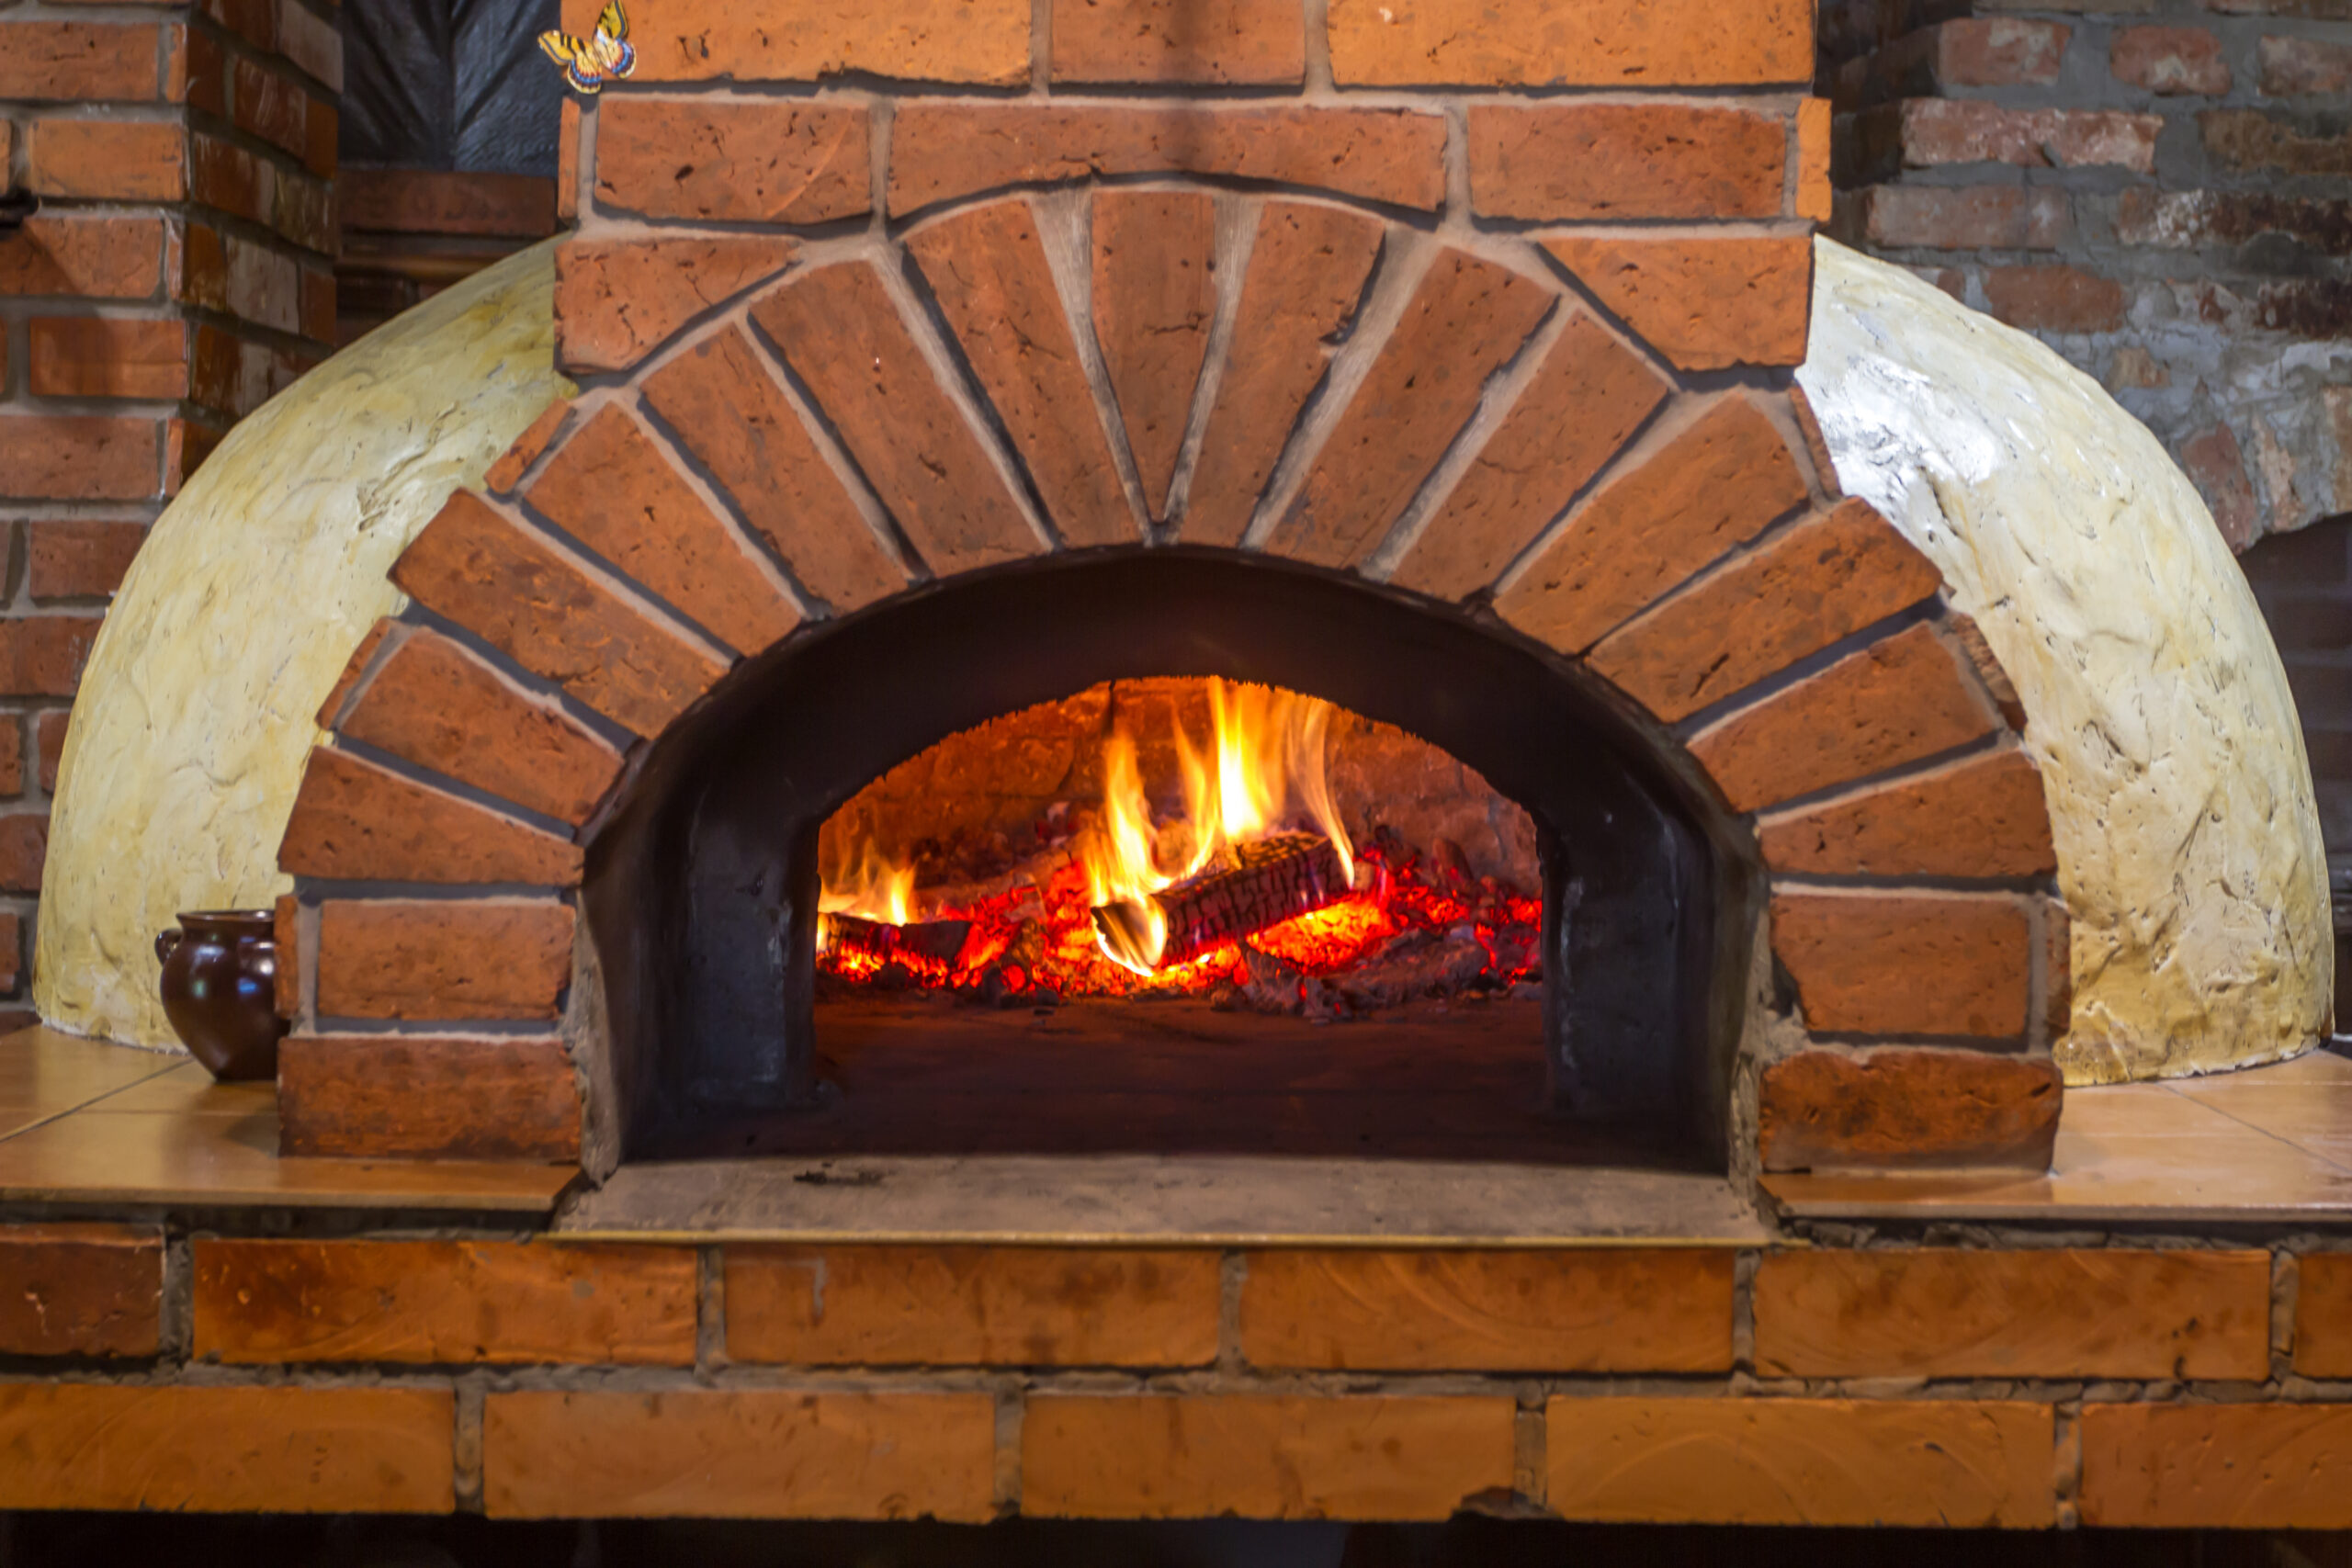 Fire and burn coals in stone ovens. Oven made of brick and clay on the wood